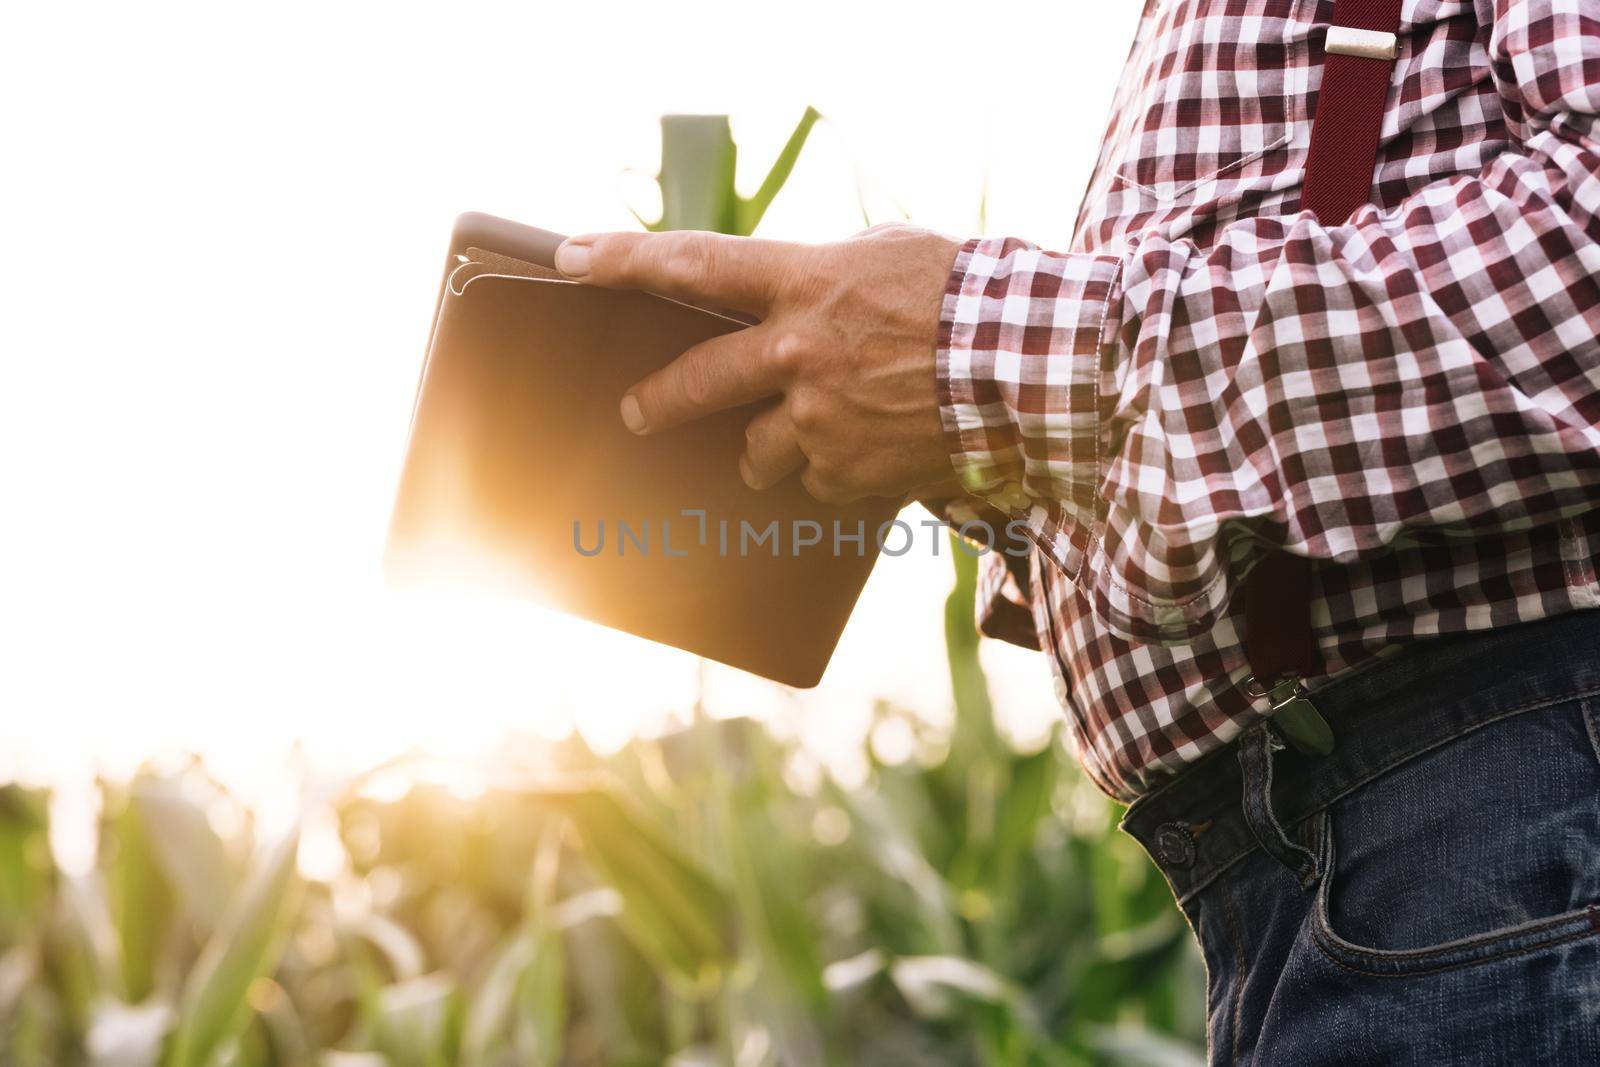 Farmer working in a cornfield, inspecting and tuning irrigation center pivot sprinkler system on tablet. Working in field harvesting crop. Agriculture concept by uflypro